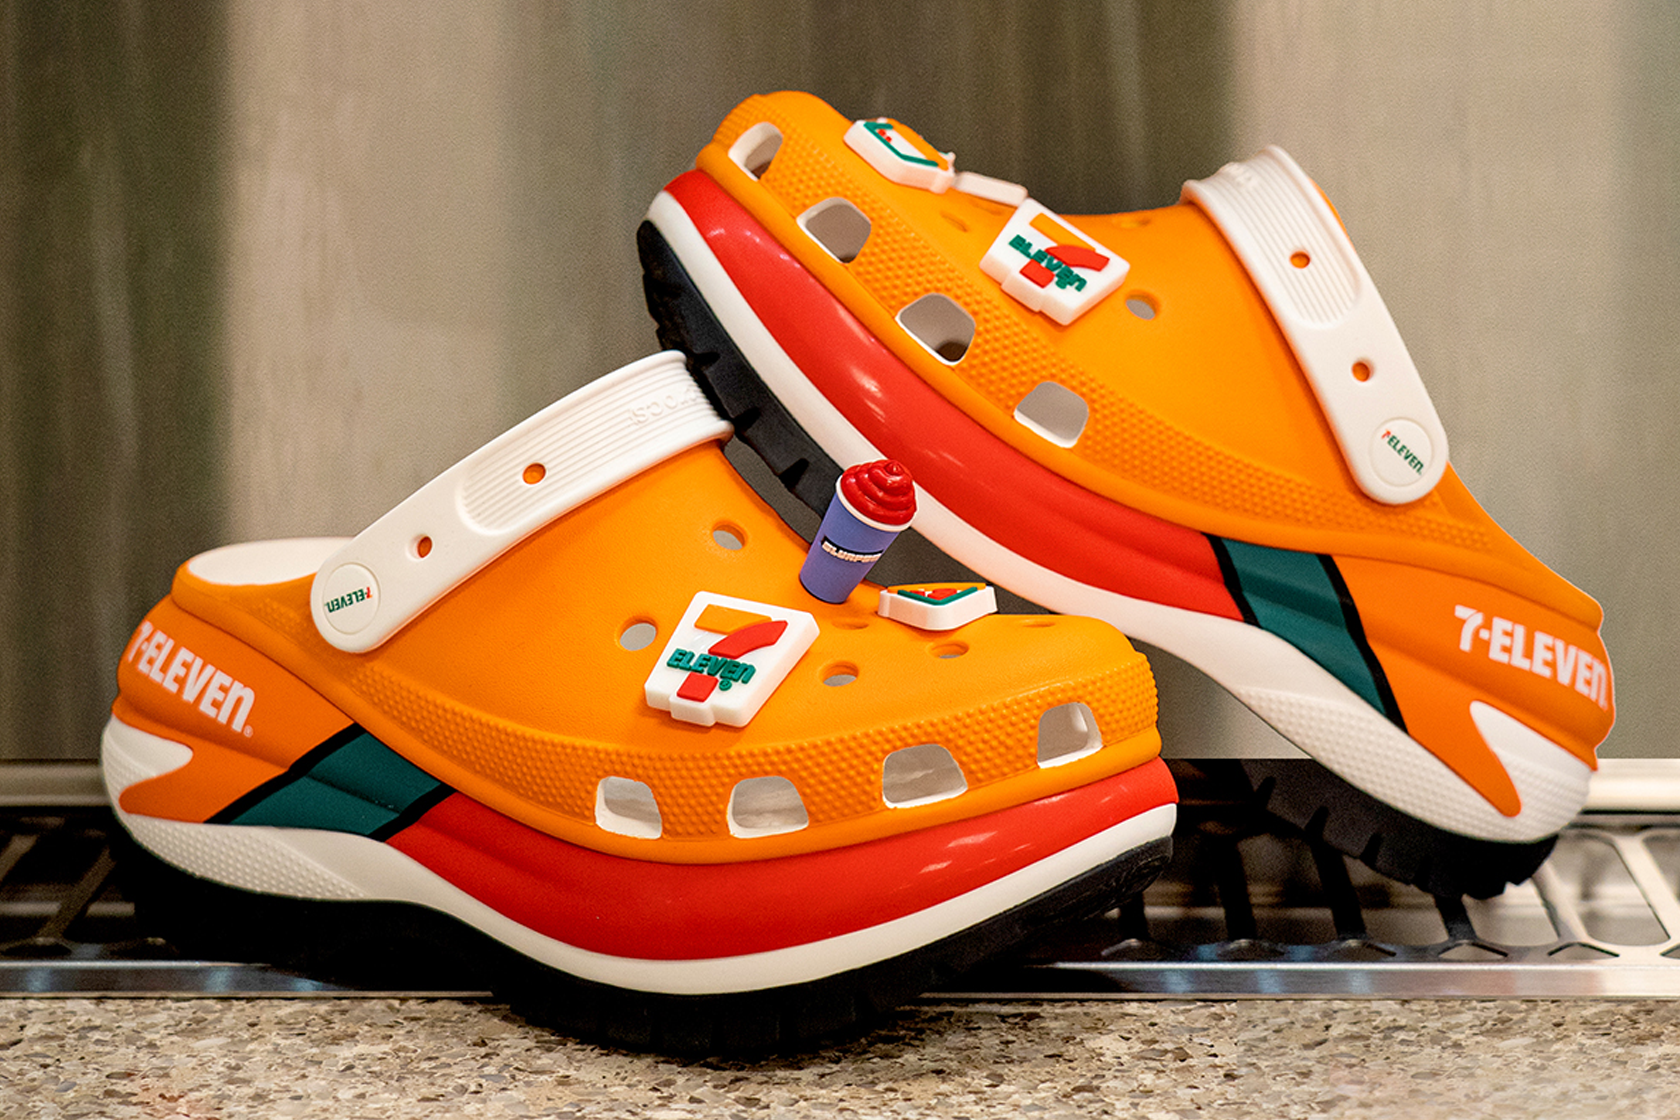 These 7-Eleven Crocs are the perfect snack aisle shoe